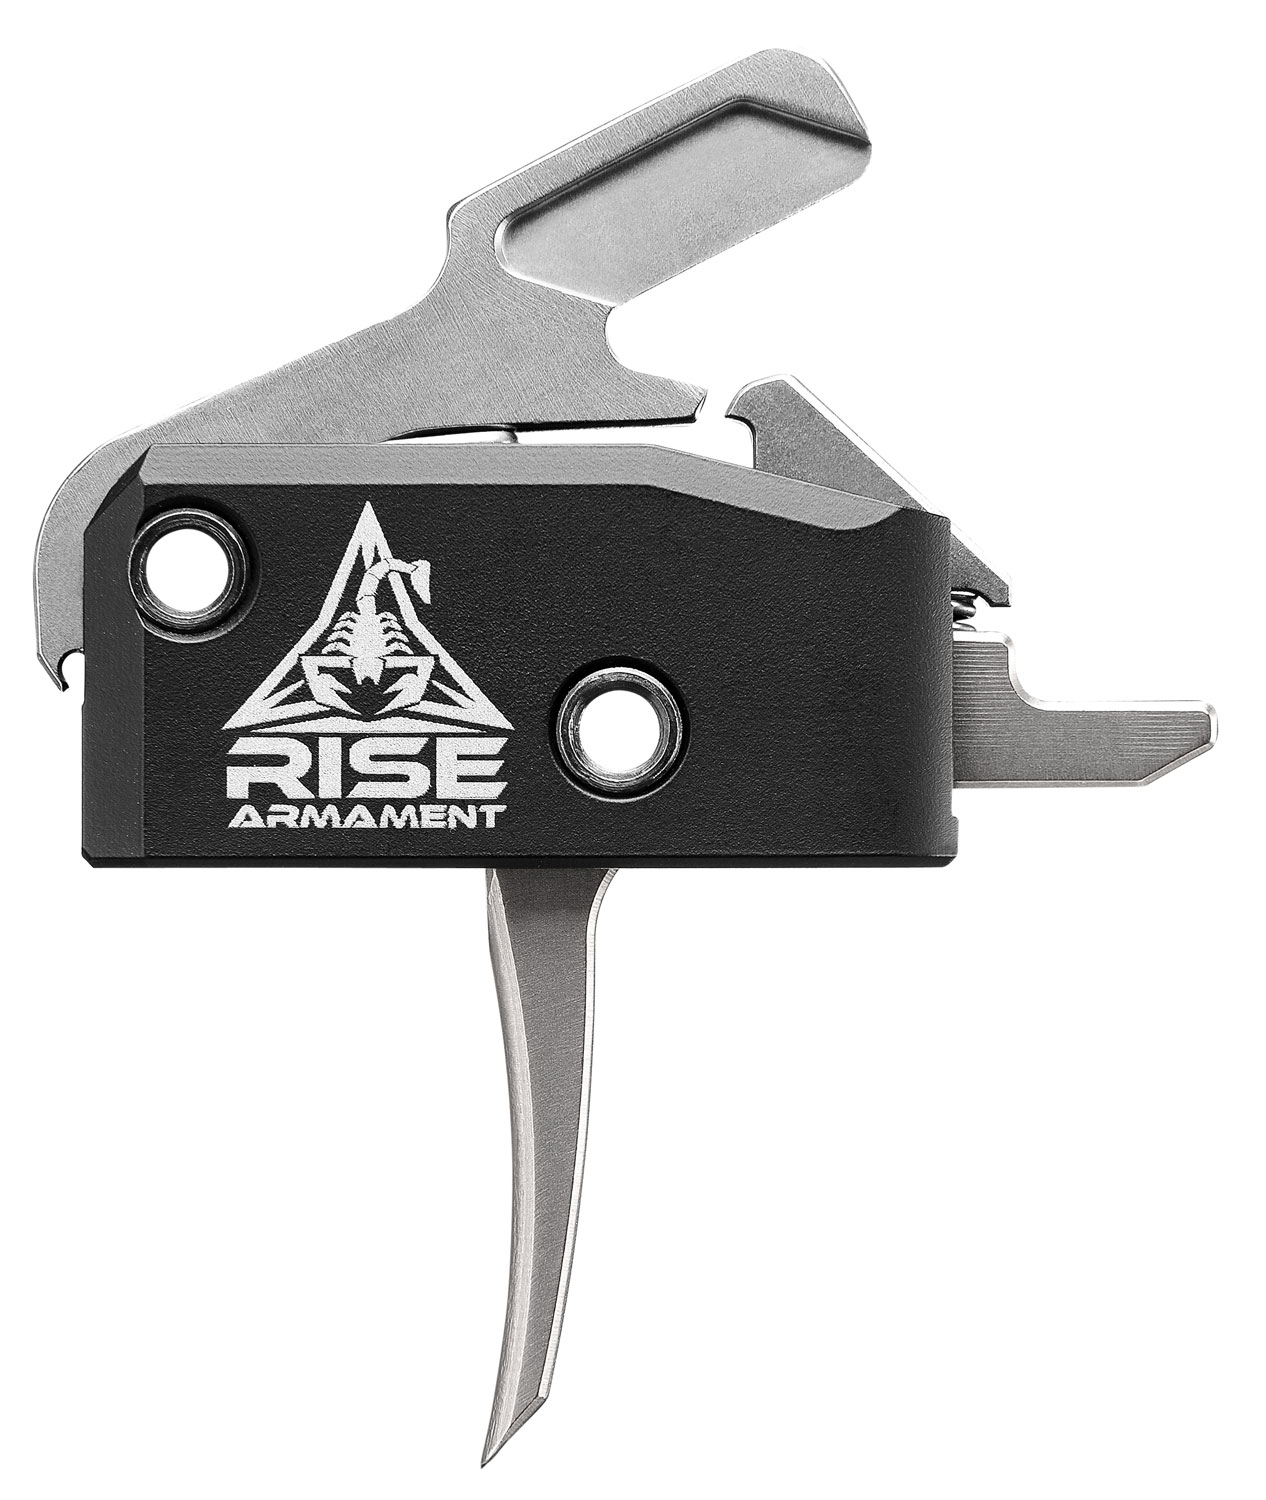 RISE TRIGGER HIGH PERFORMANCE 3.5LB PULL AR-15 SILVER